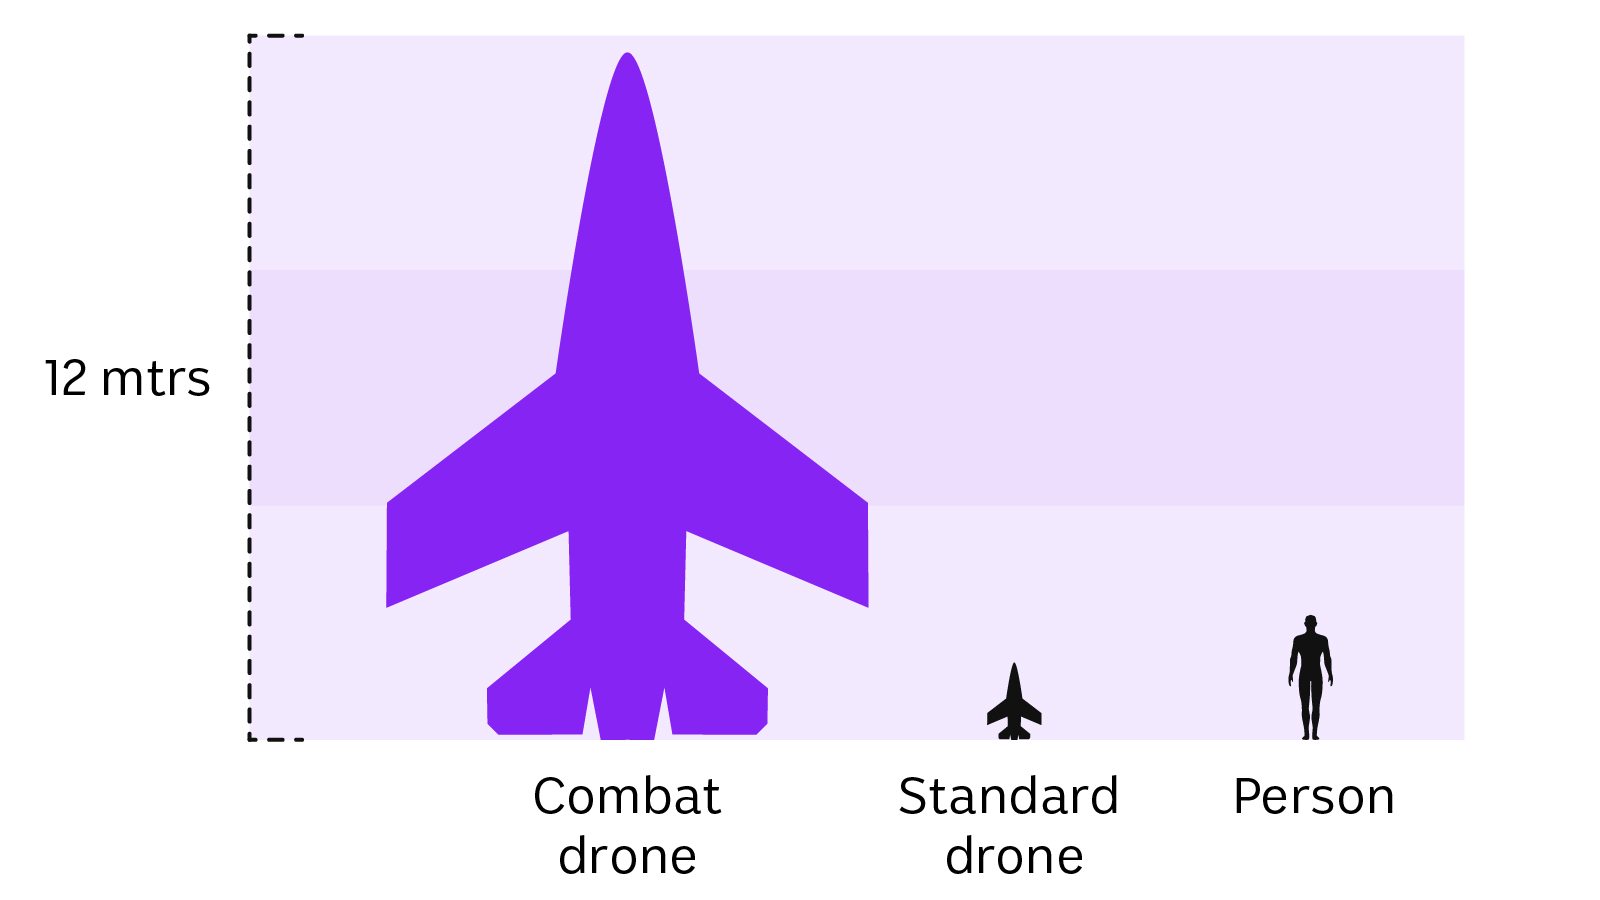 A comparison between the proposed combat drone, a standard drone and the average height of a male adult